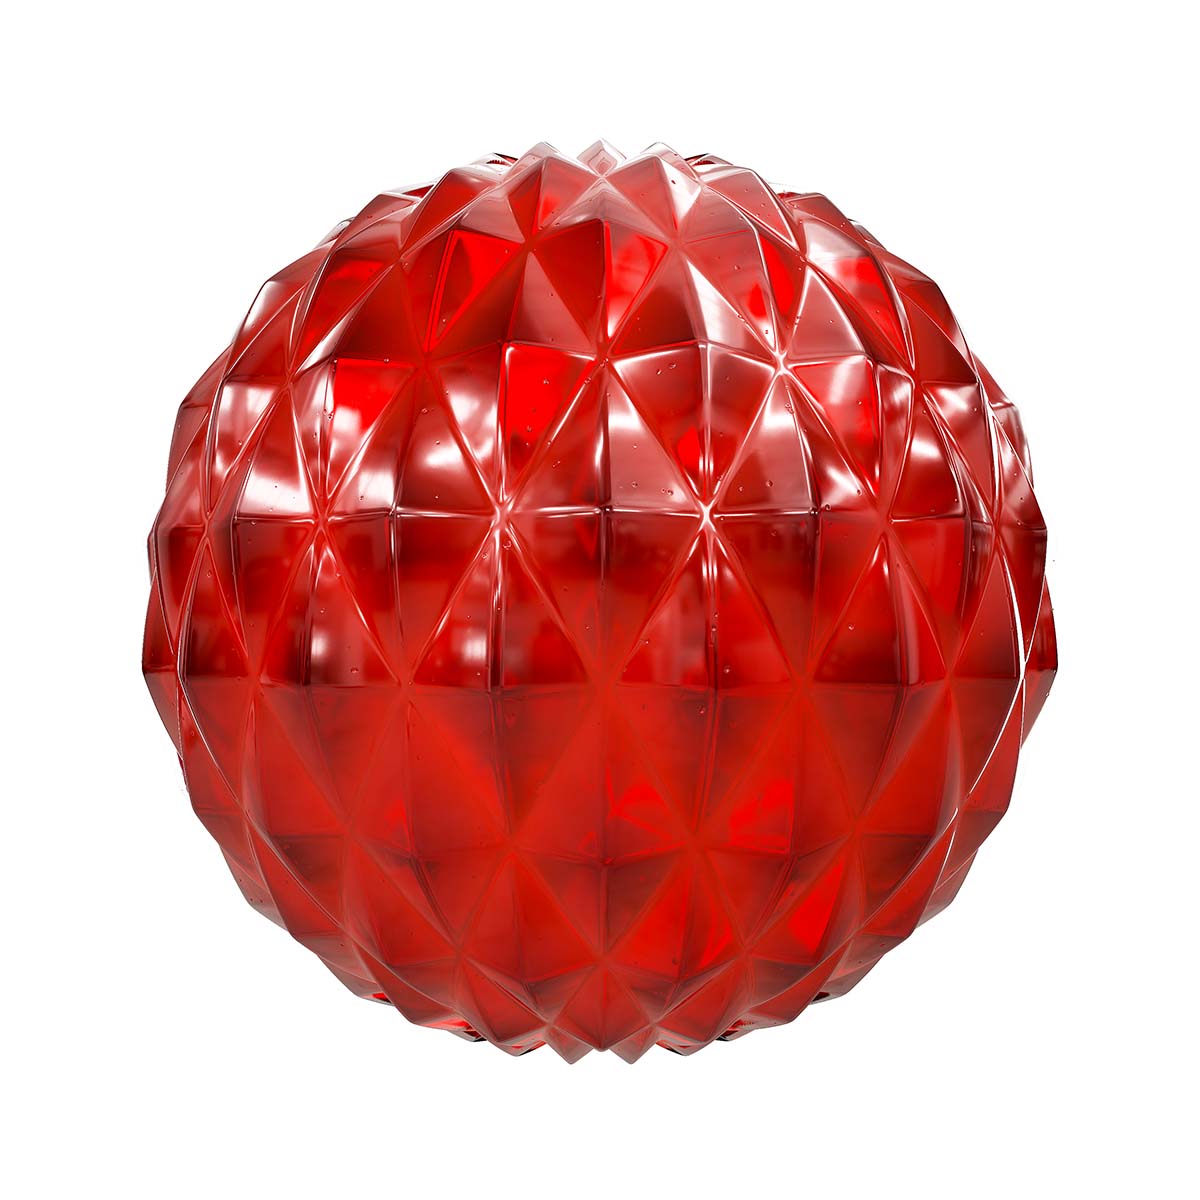 Red Patterned Glass PBR Texture